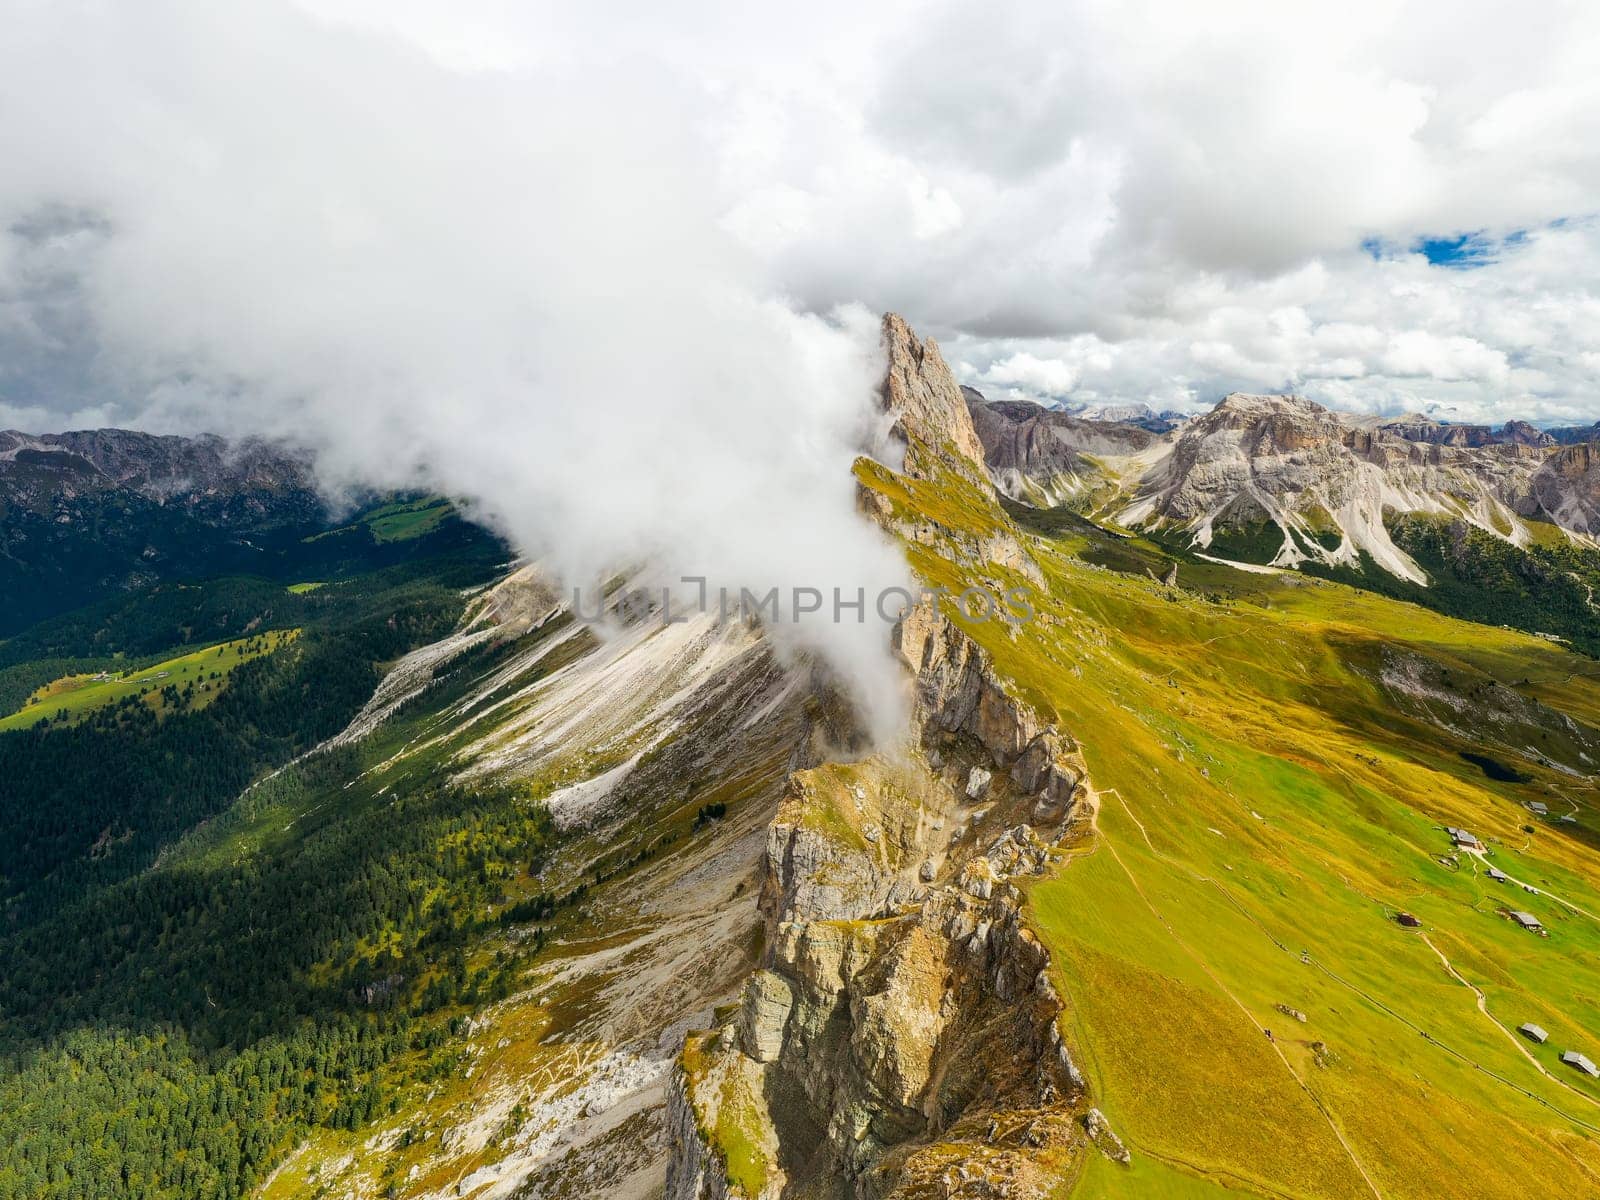 White heavy clouds descend covering Seceda bare peaks of mountain range. Scenic Italian Alps and dense fog in summer morning aerial view